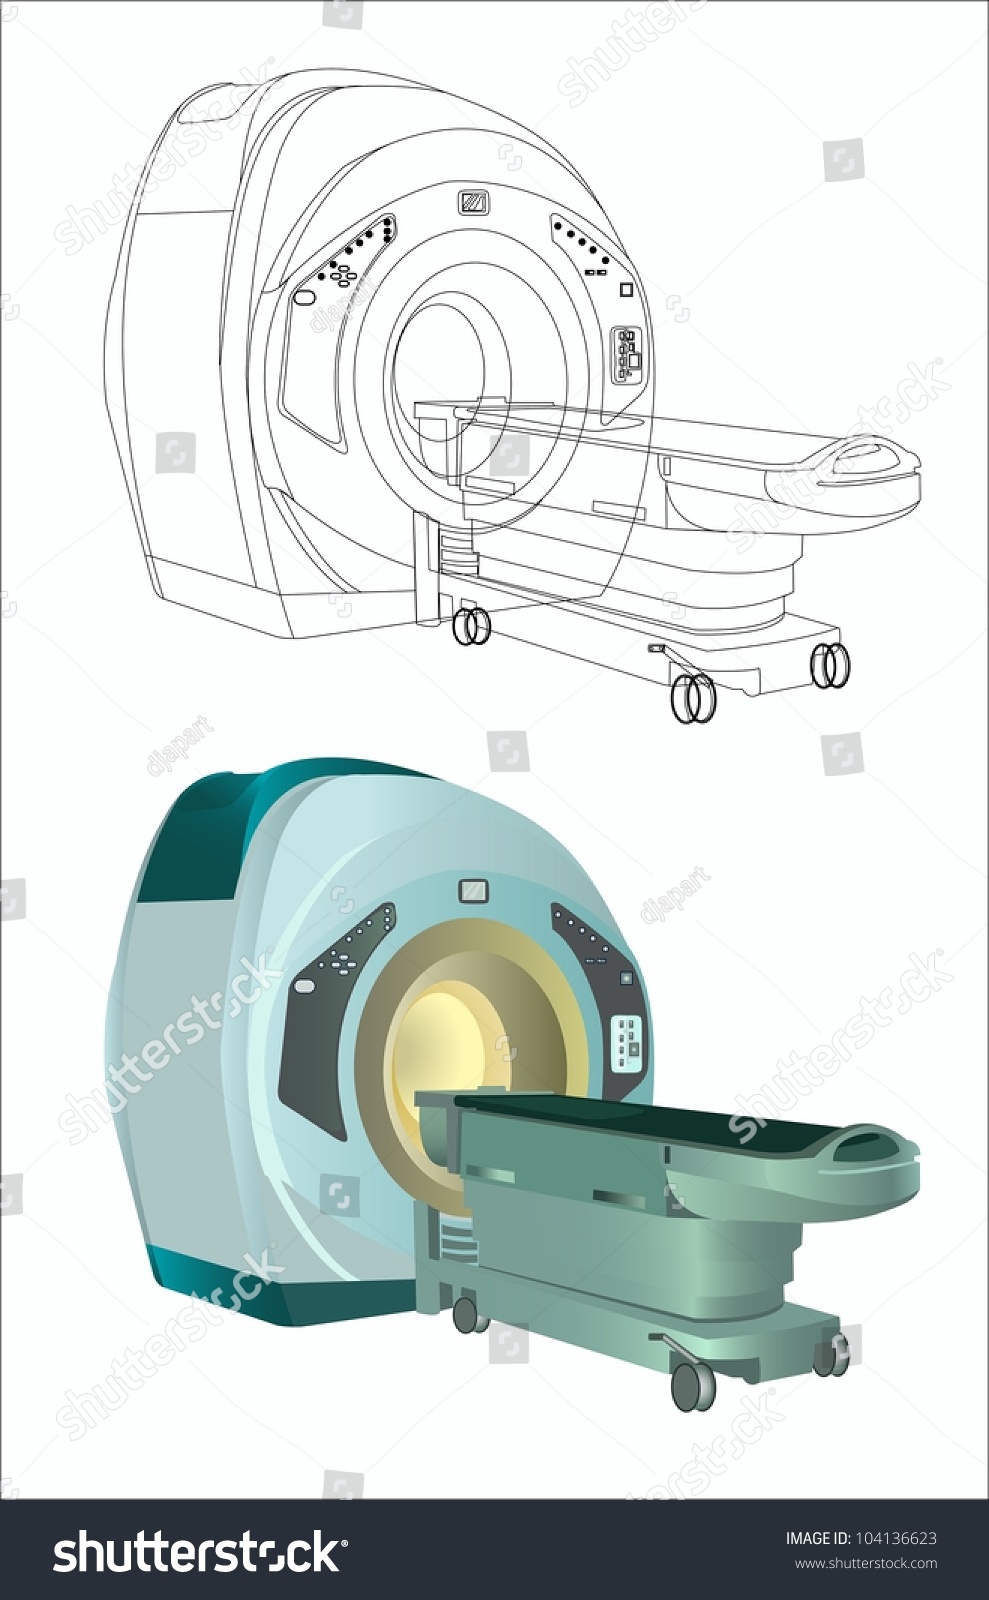 SVG of Magnetic resonance imaging with outline version isolated on white svg